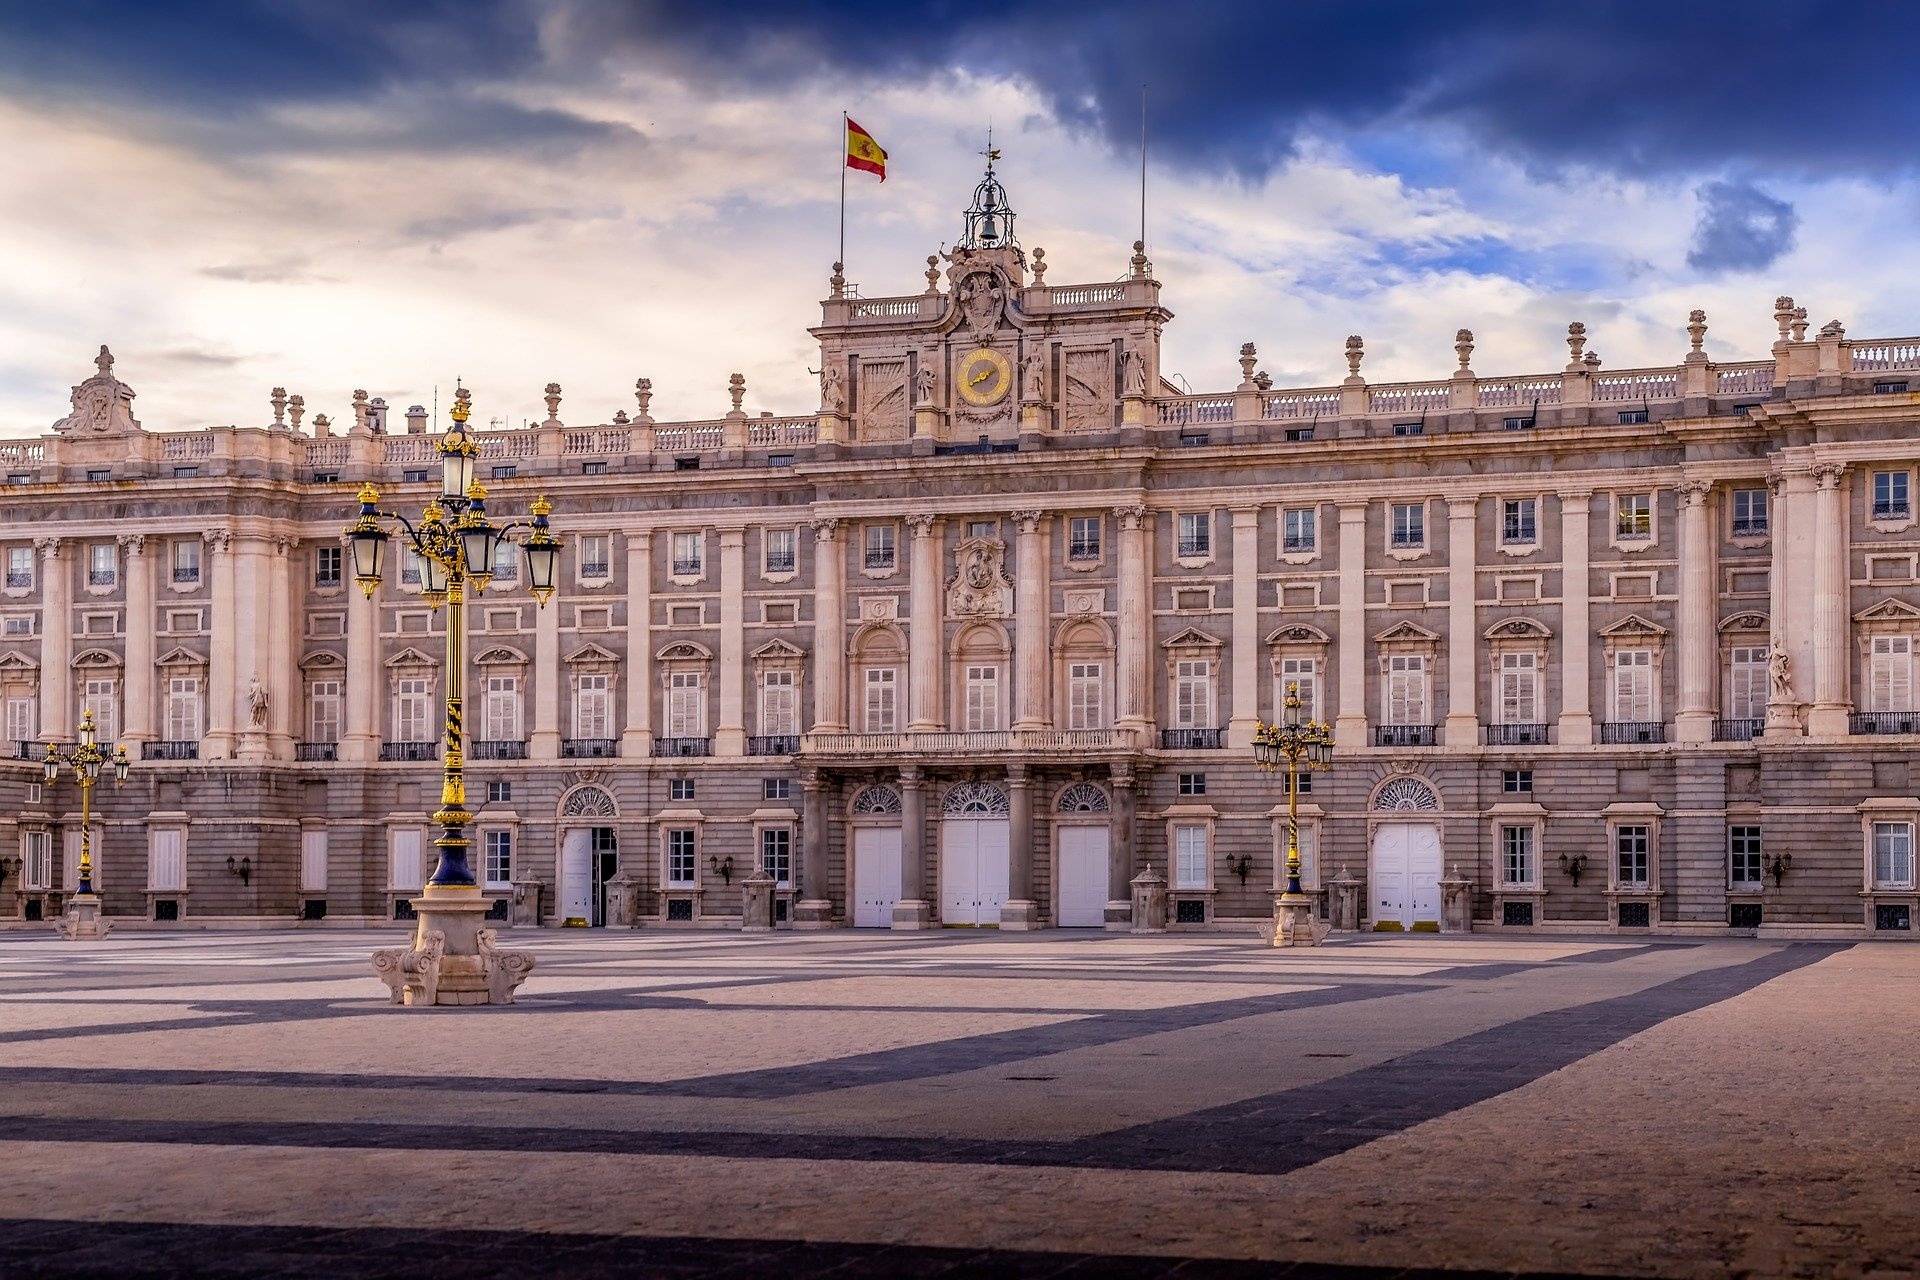 Fast track tickets, Royal Palace of Madrid, Skip-the-line access, Tourist attraction, 1920x1280 HD Desktop